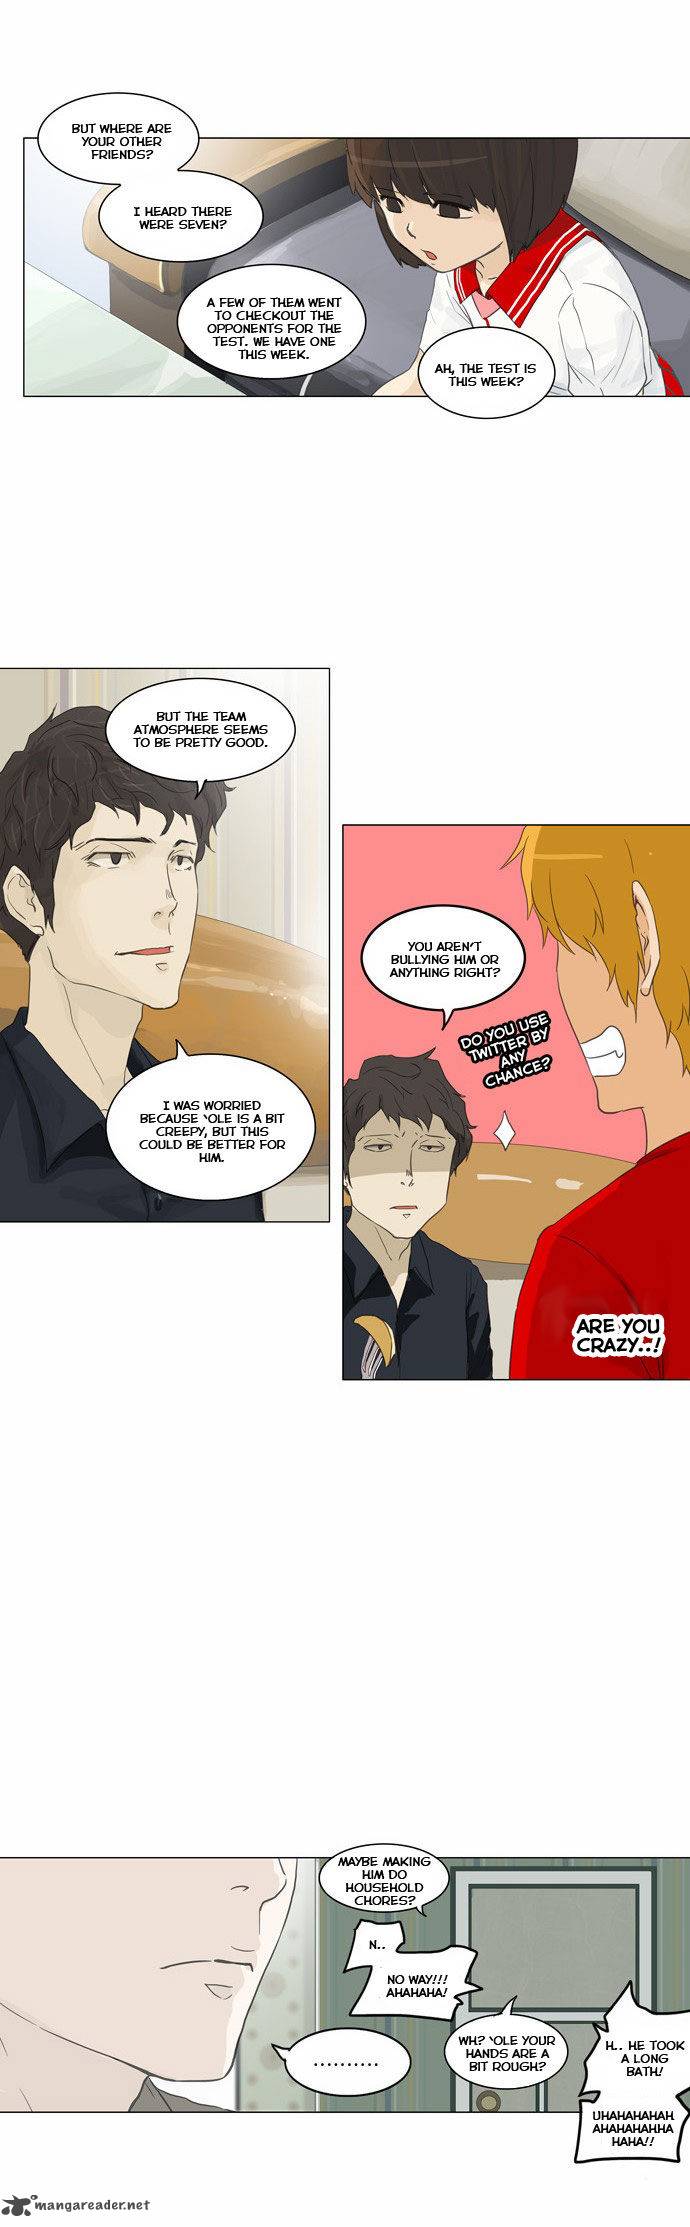 Tower Of God 107 18